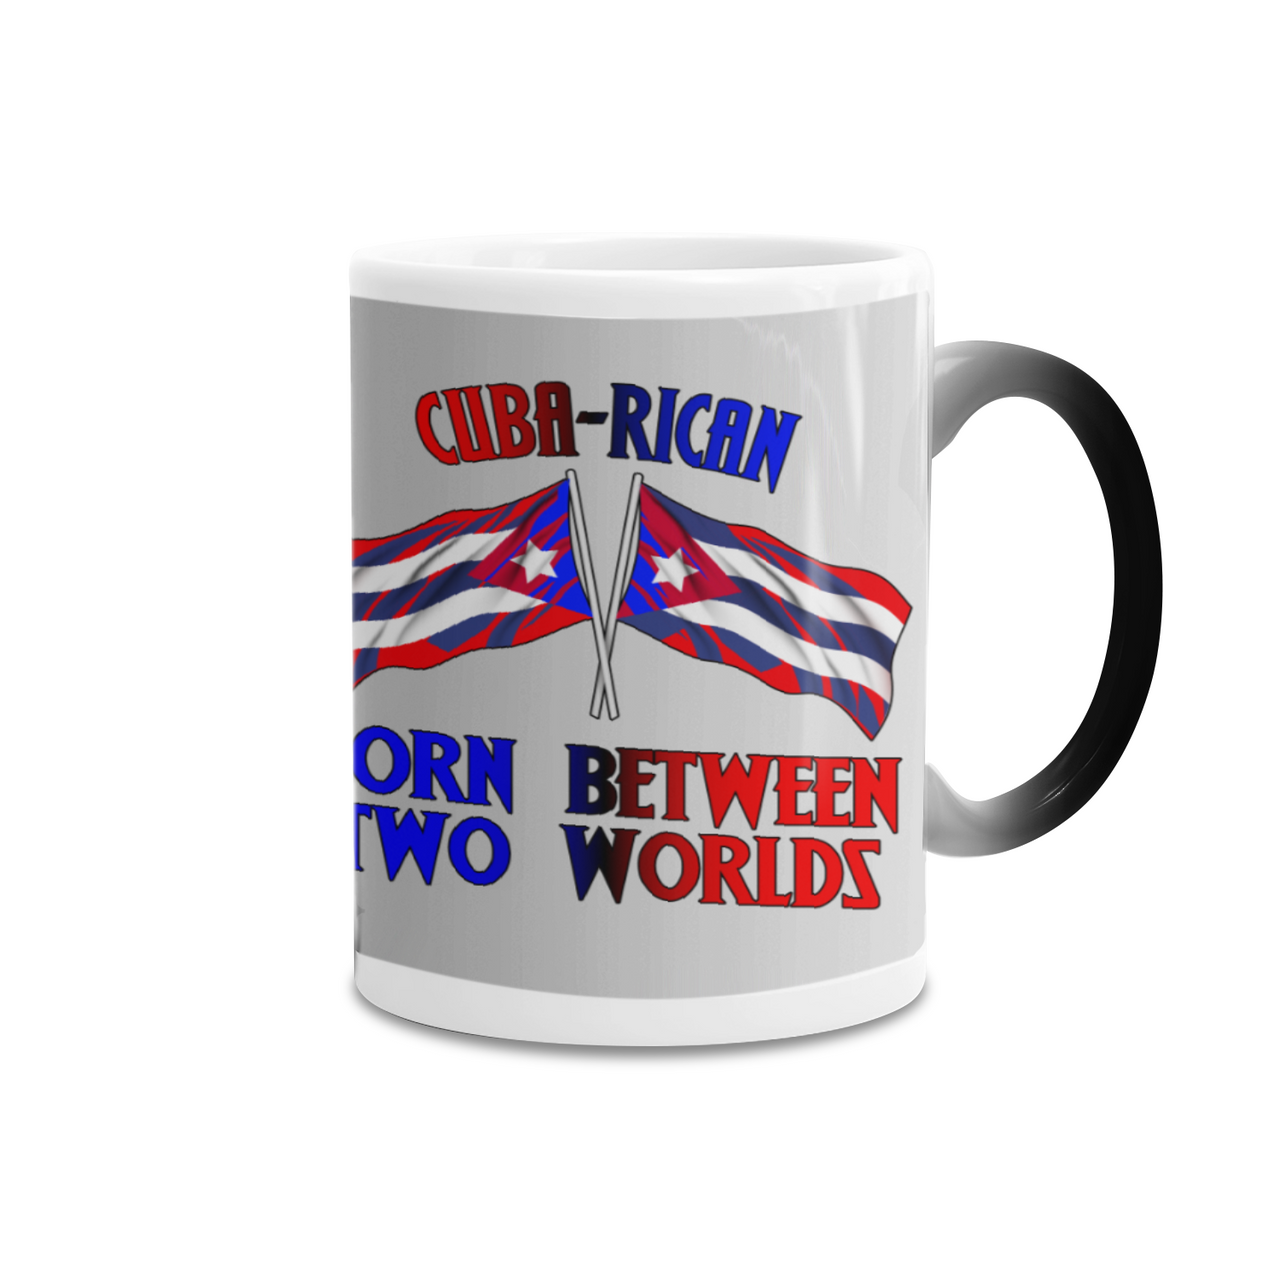 Cuba-Rican Town Between Two Worlds Coffe Cup